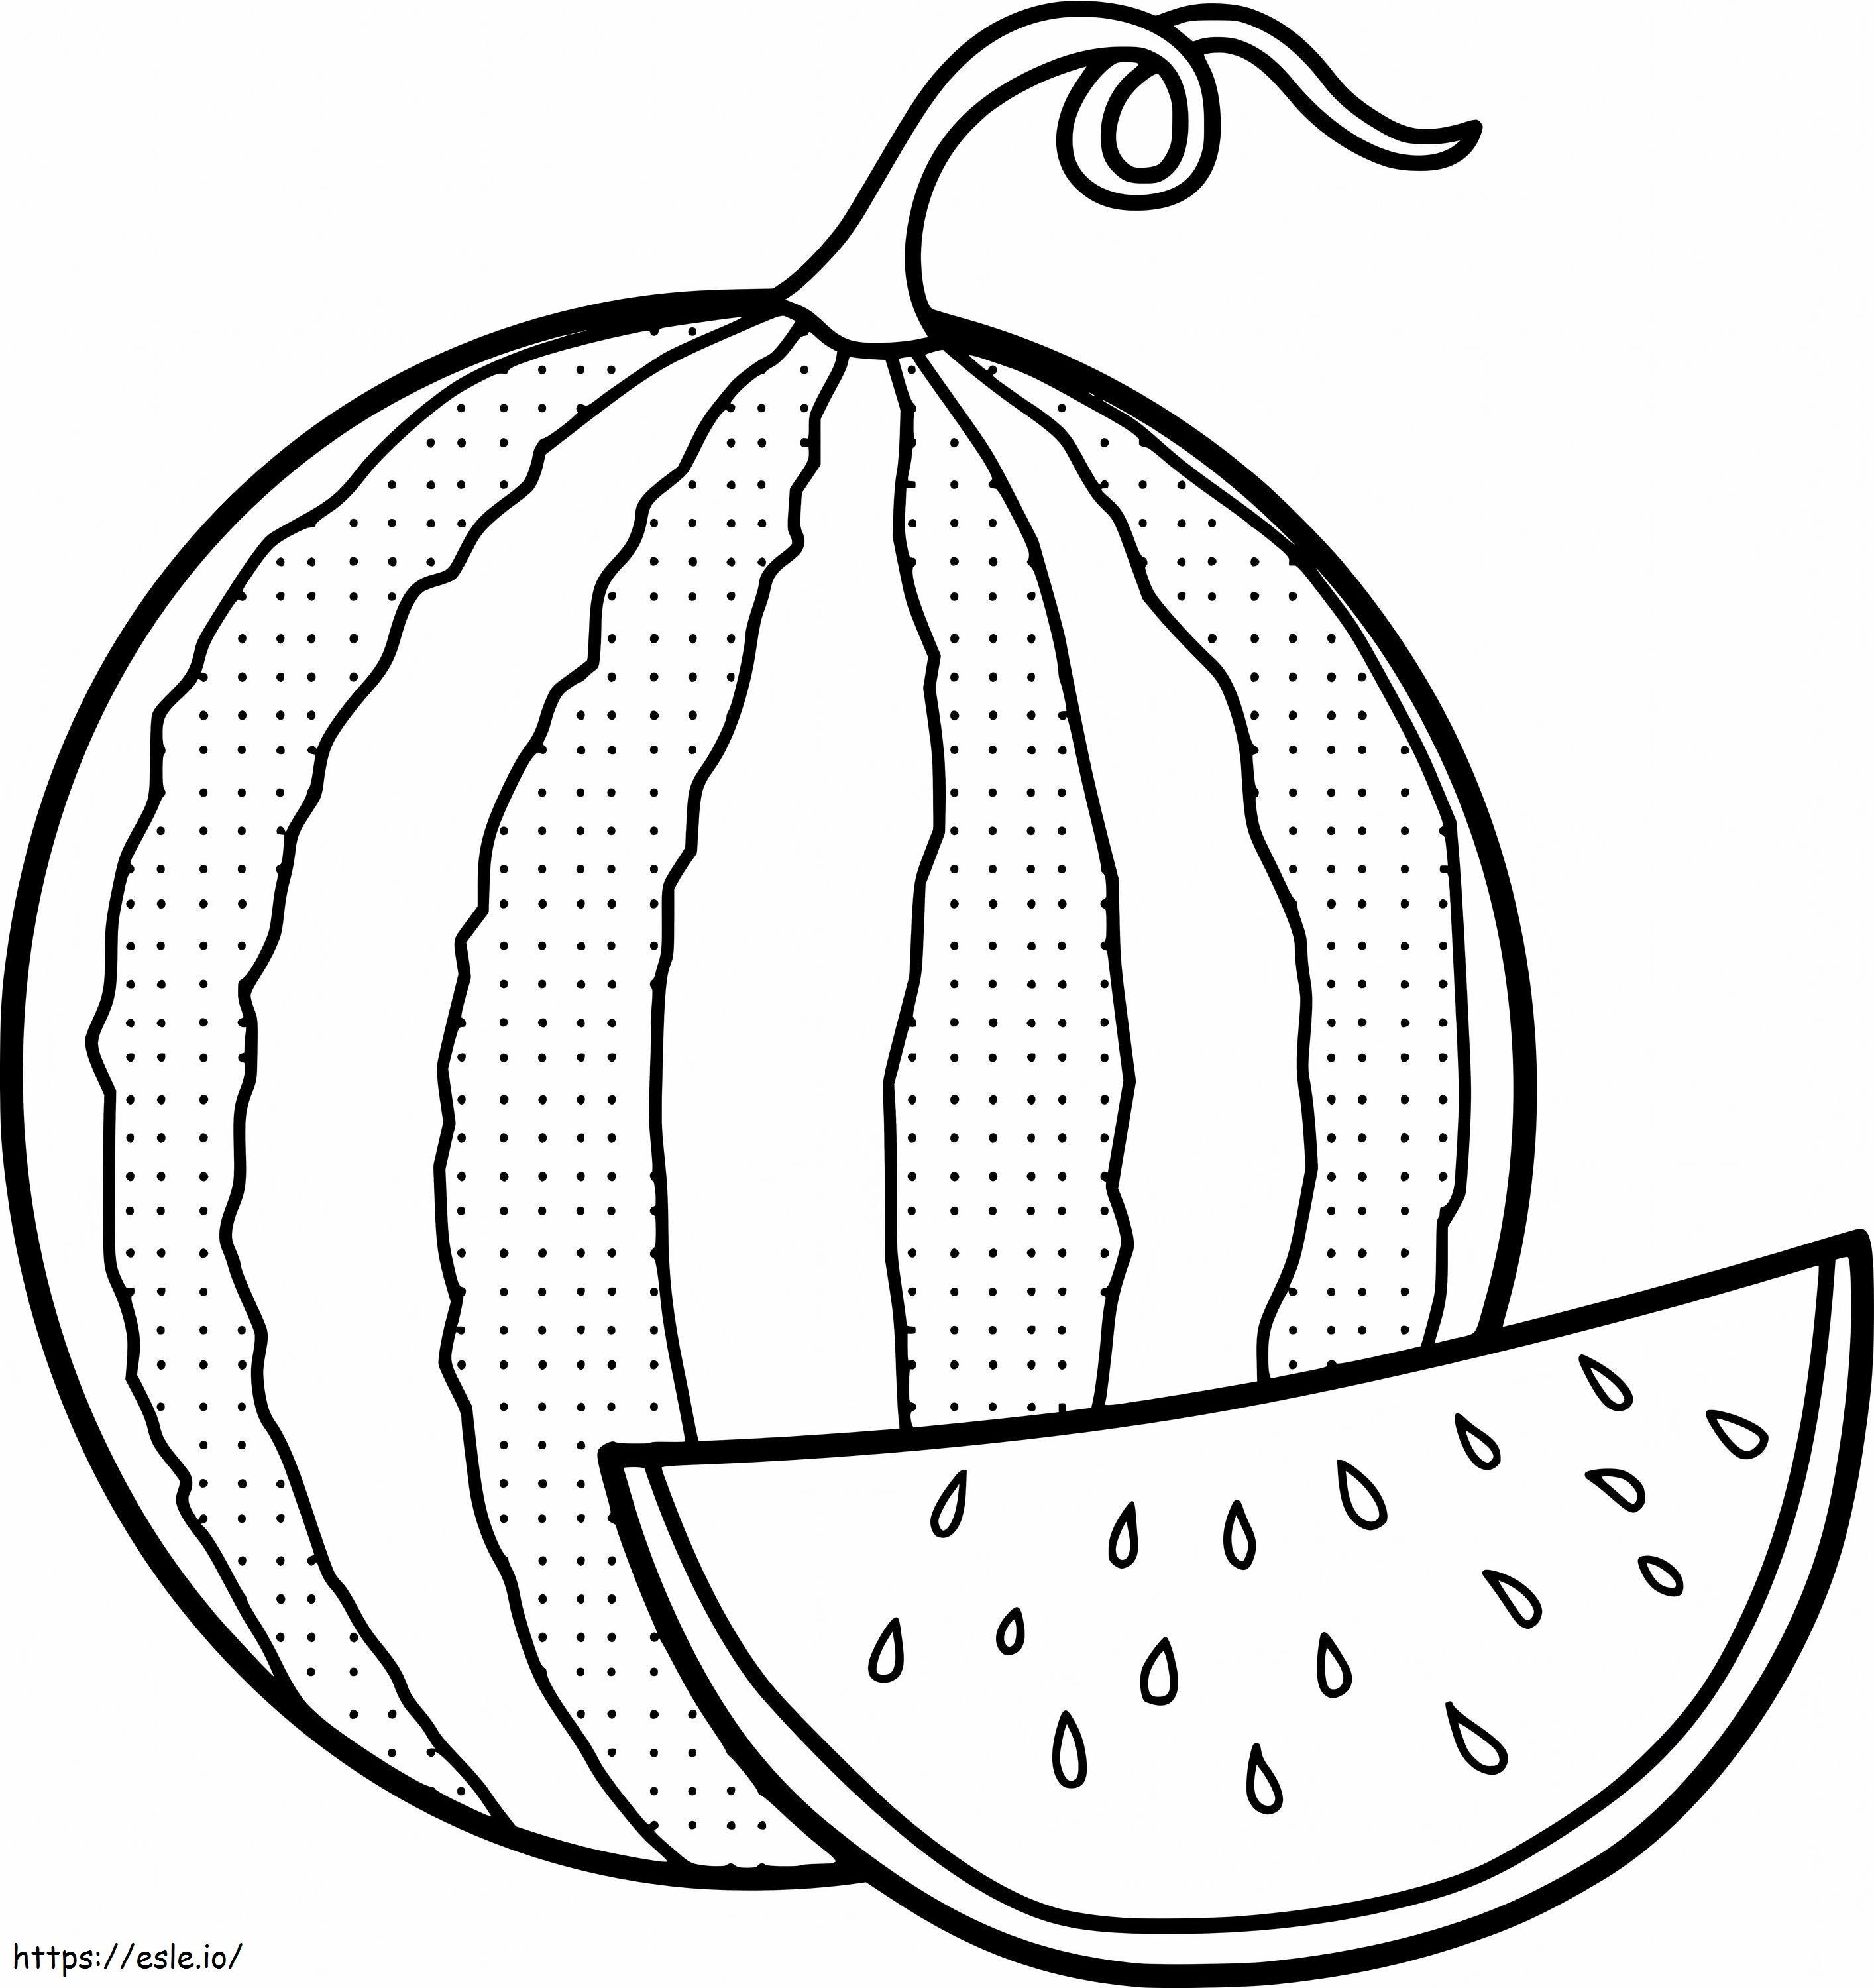 Watermelon Slice And Plain Watermelon coloring page